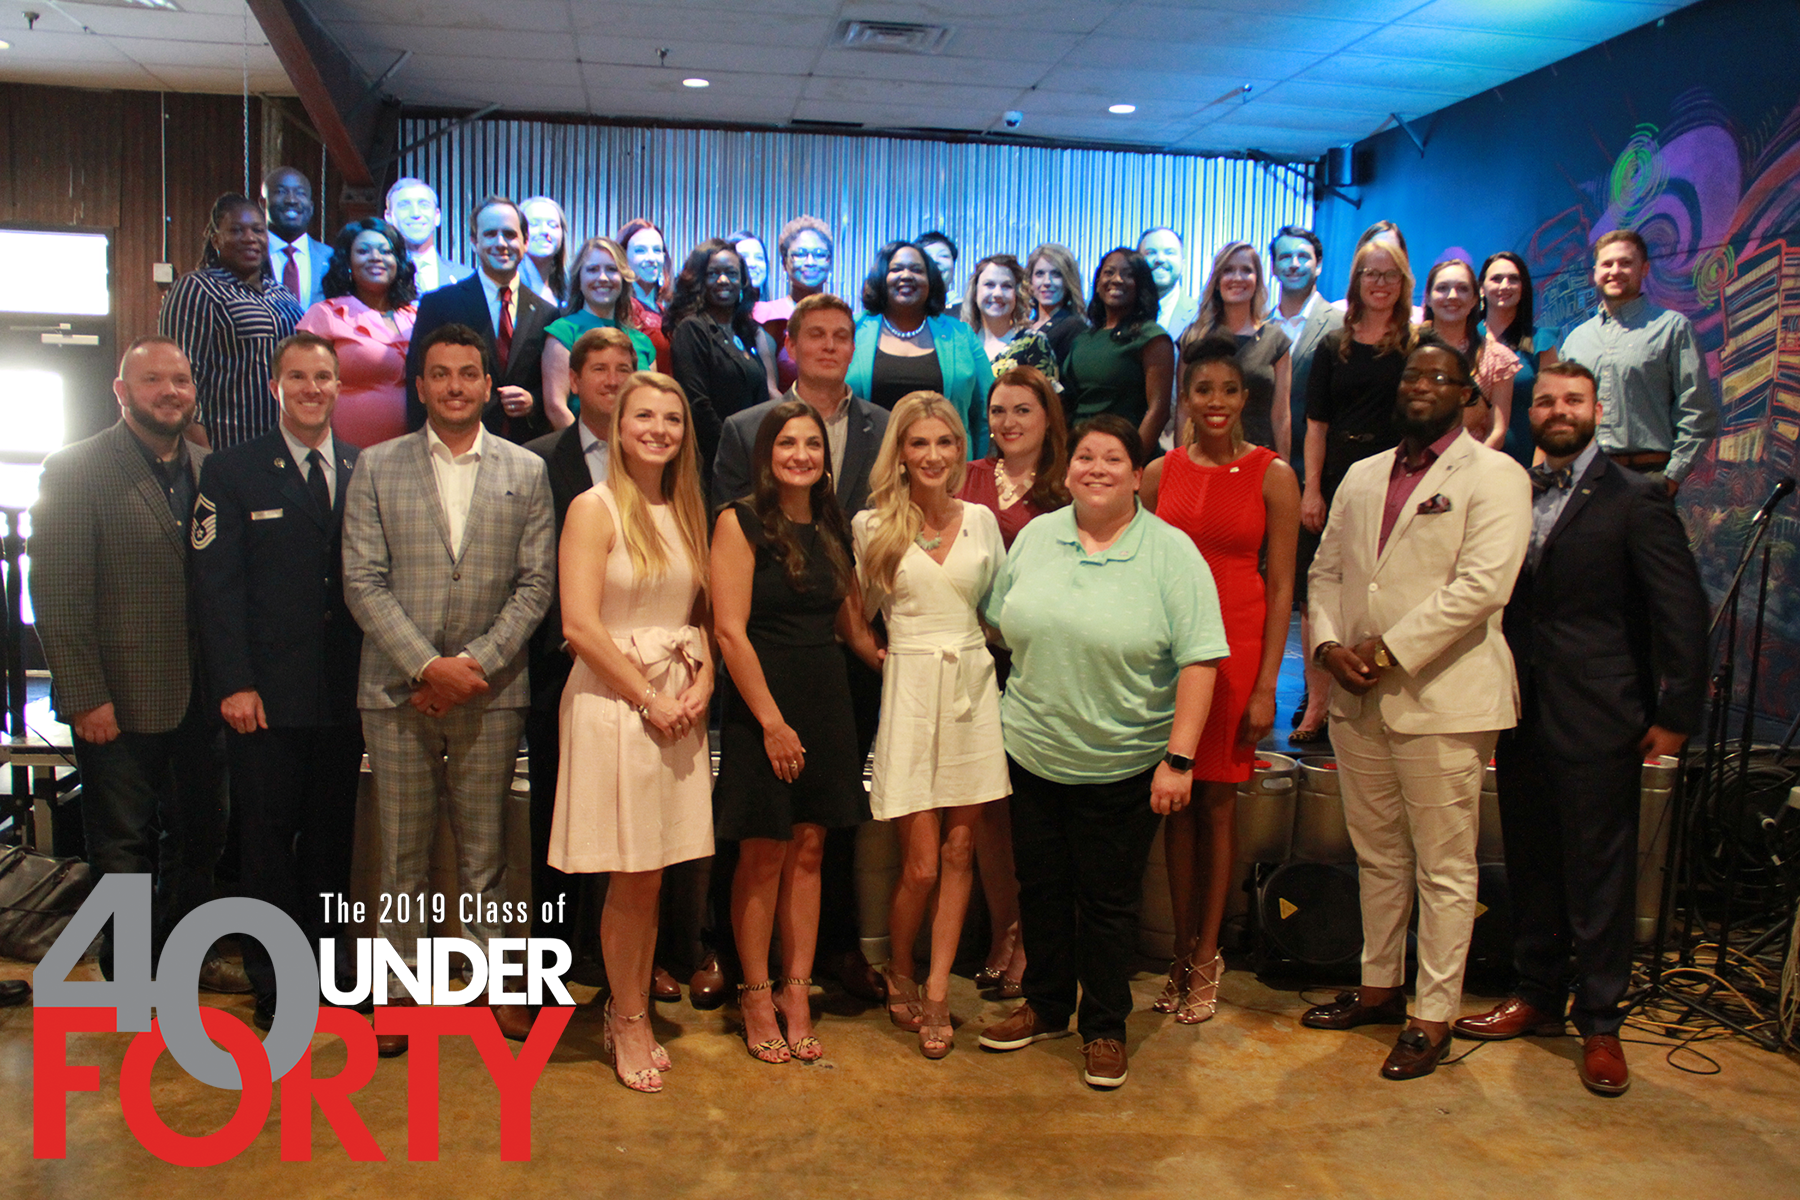 YPI Announces 2019 Class of 40 Under Forty